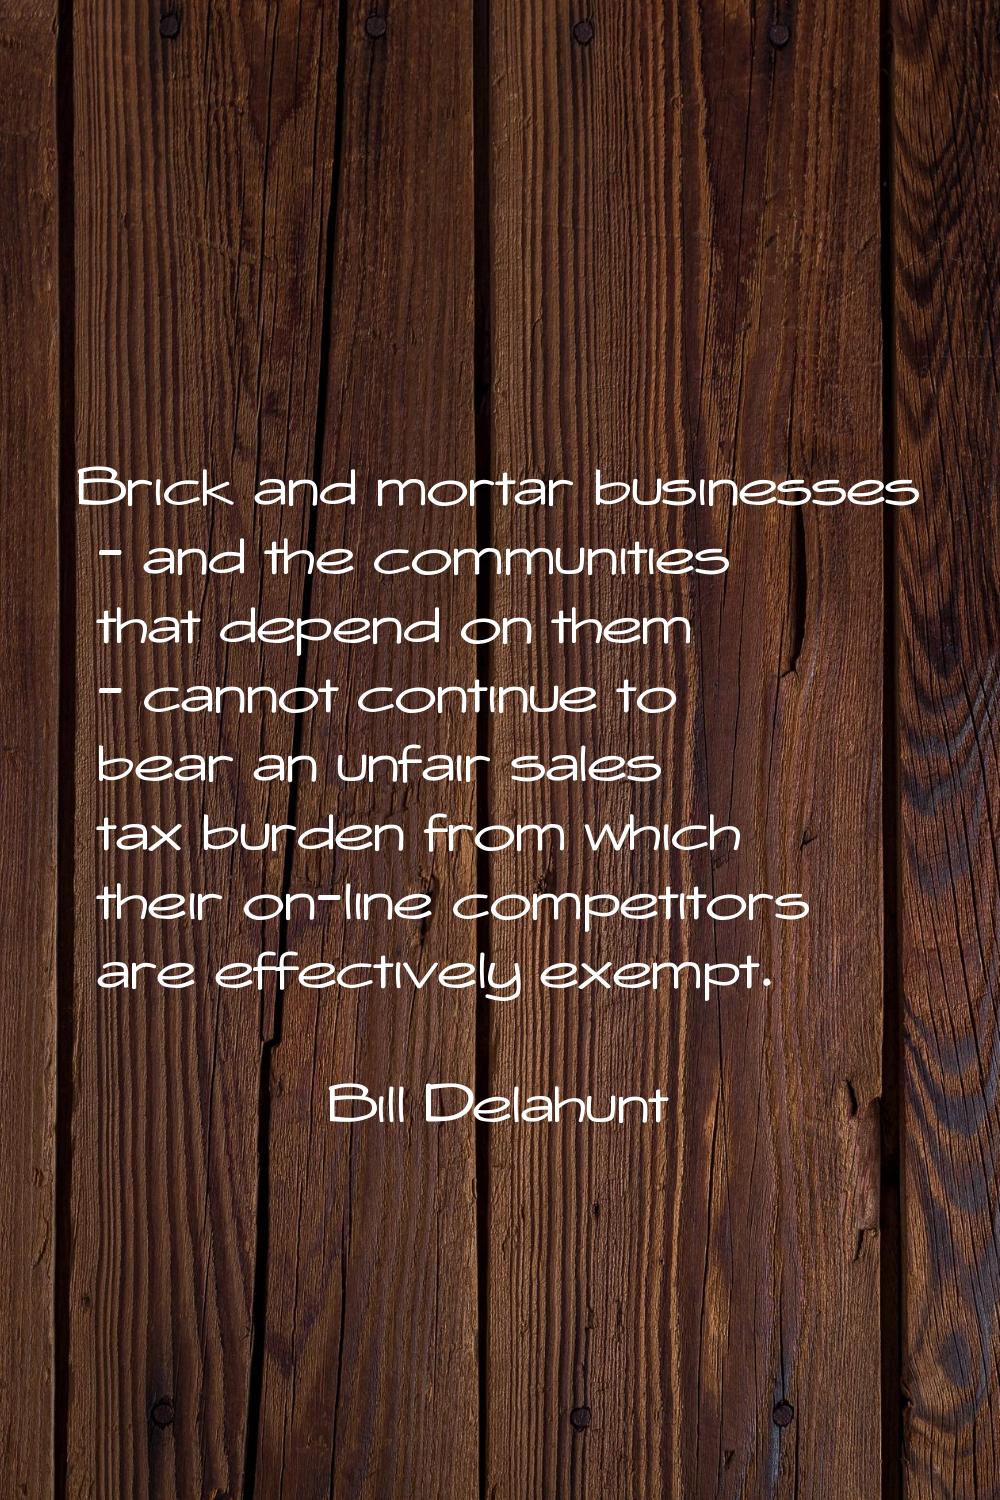 Brick and mortar businesses - and the communities that depend on them - cannot continue to bear an 